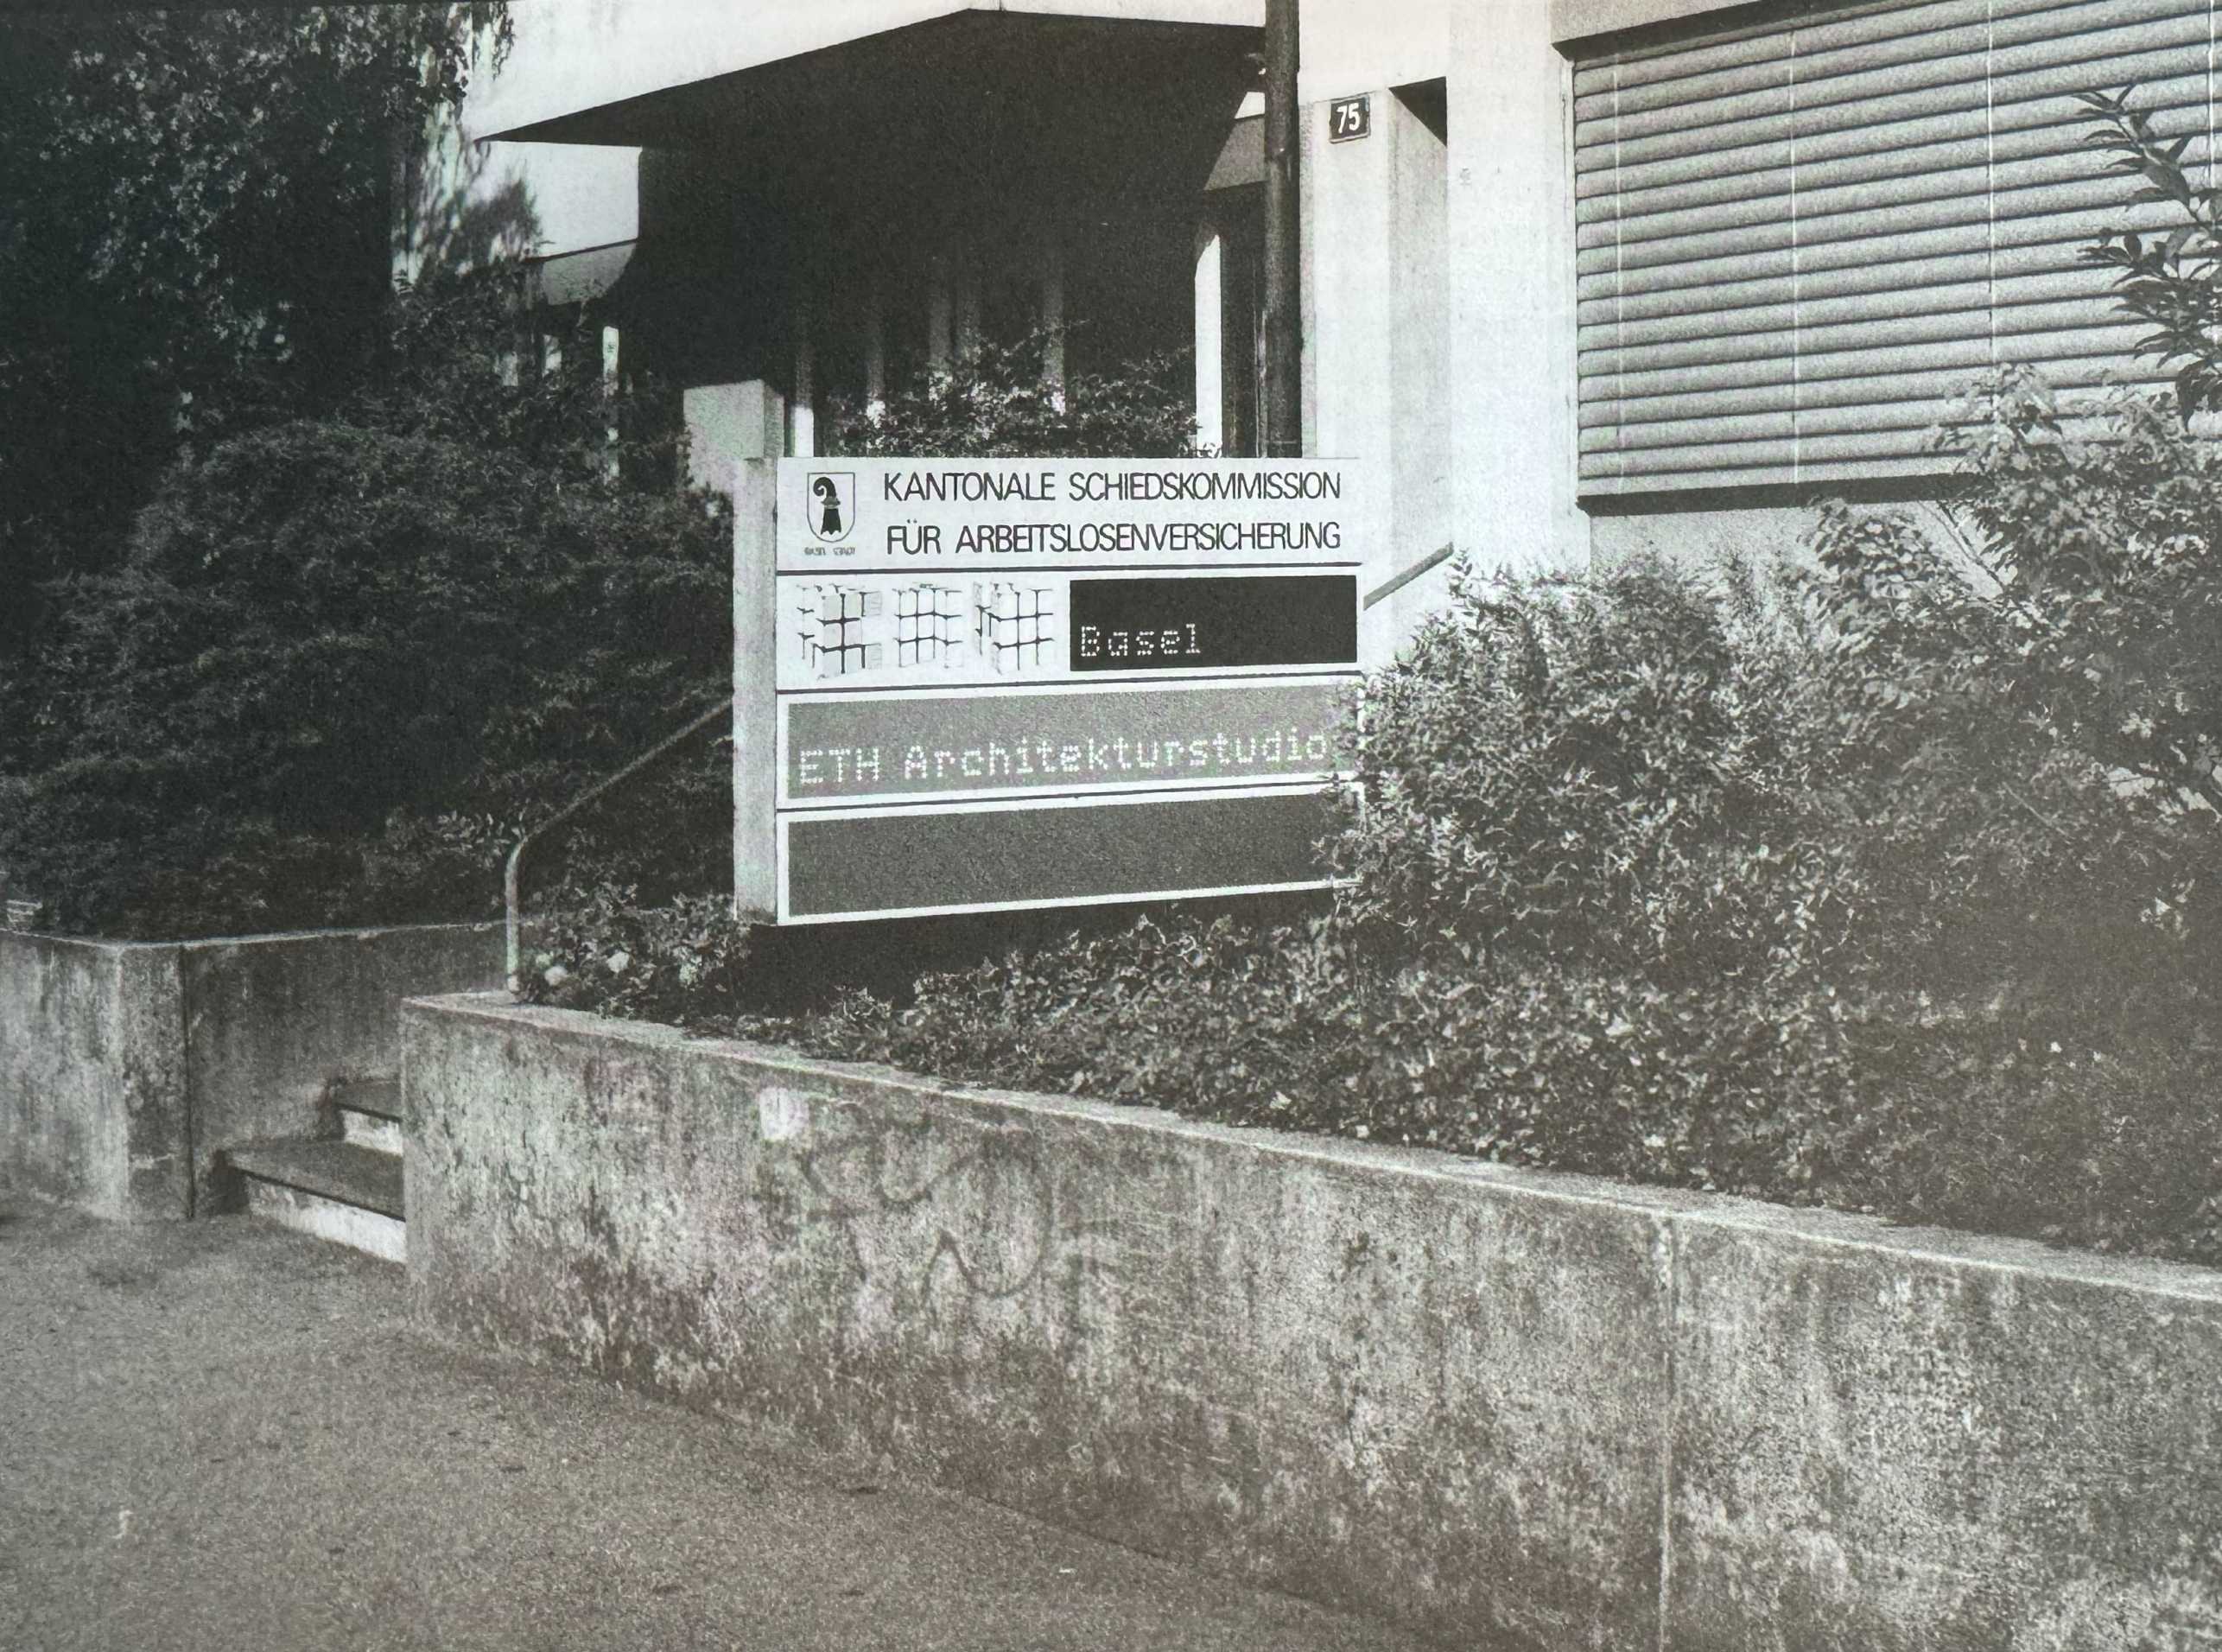 The photo from the D-ARCH yearbook from 2000 shows the first address of the ETH Studio Basel.